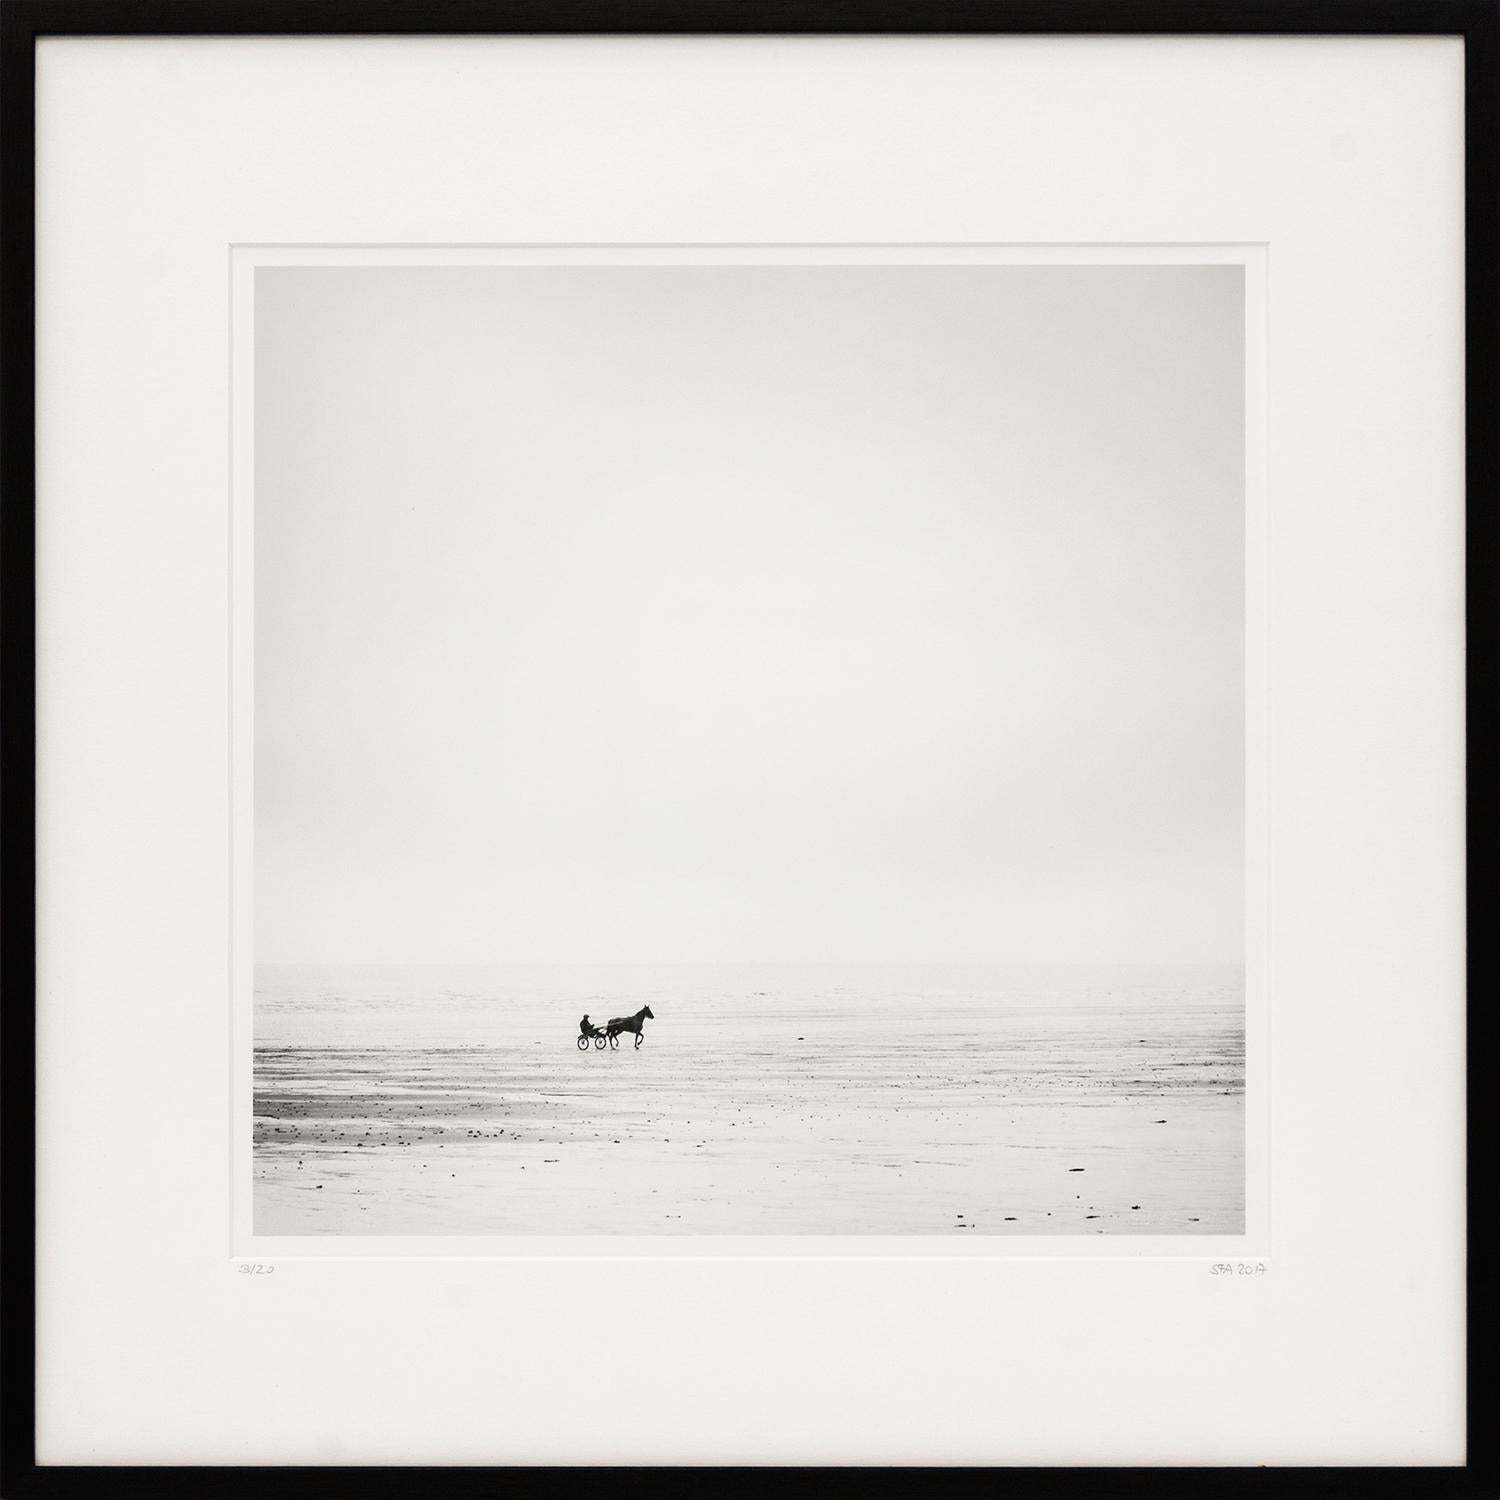 Harness Racing, France, Horse, Beach, black and white art landscape, wood frame